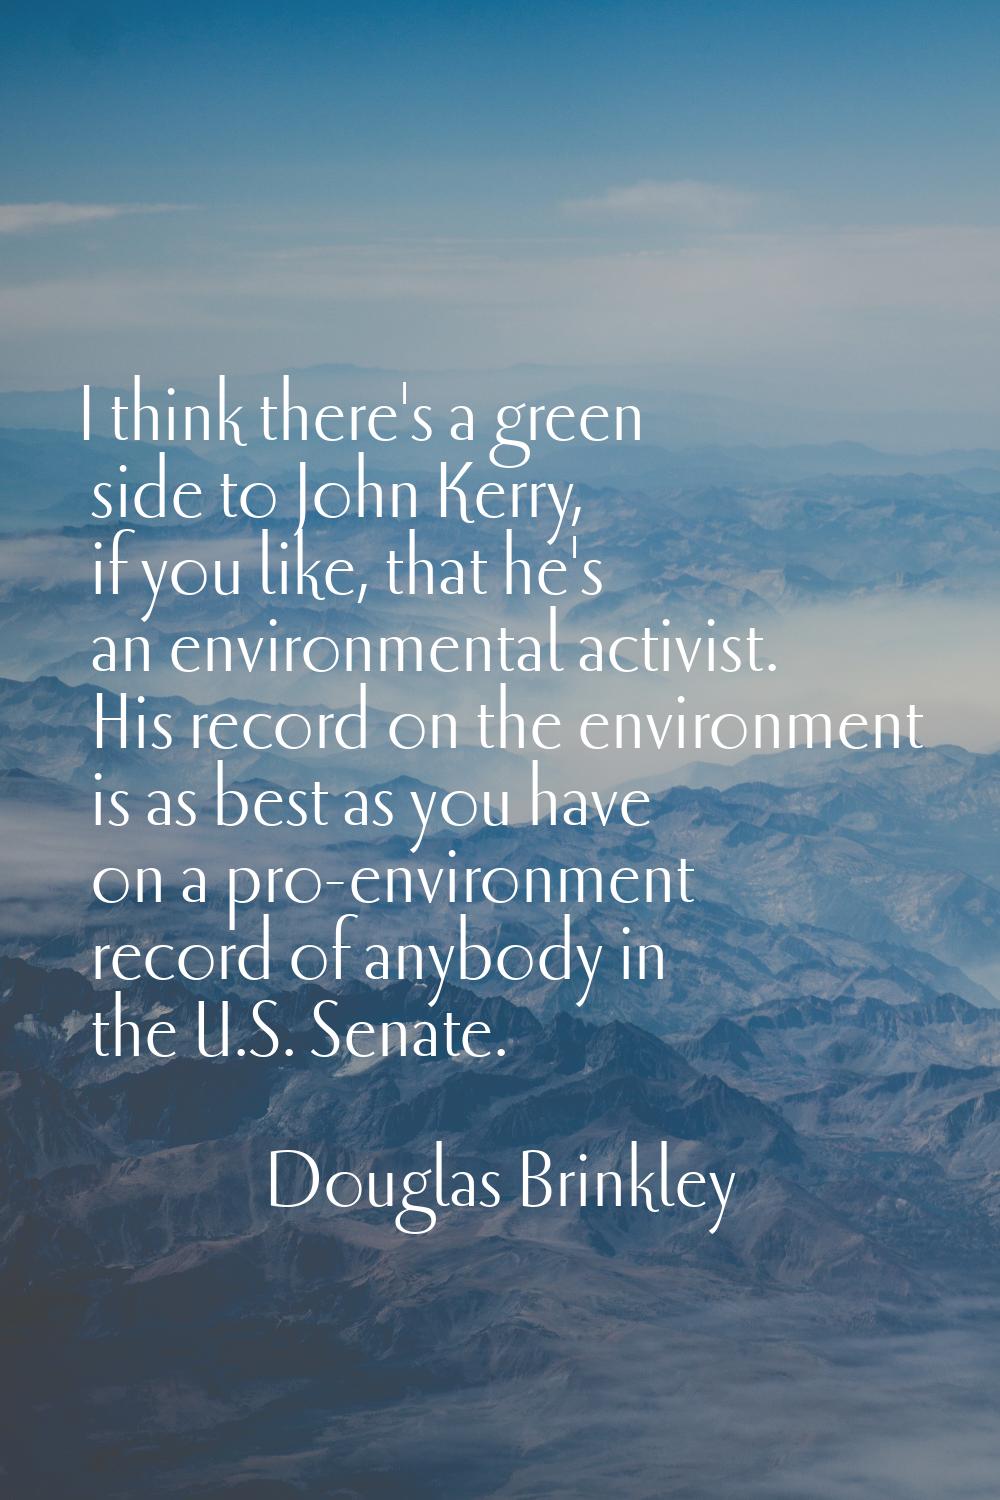 I think there's a green side to John Kerry, if you like, that he's an environmental activist. His r